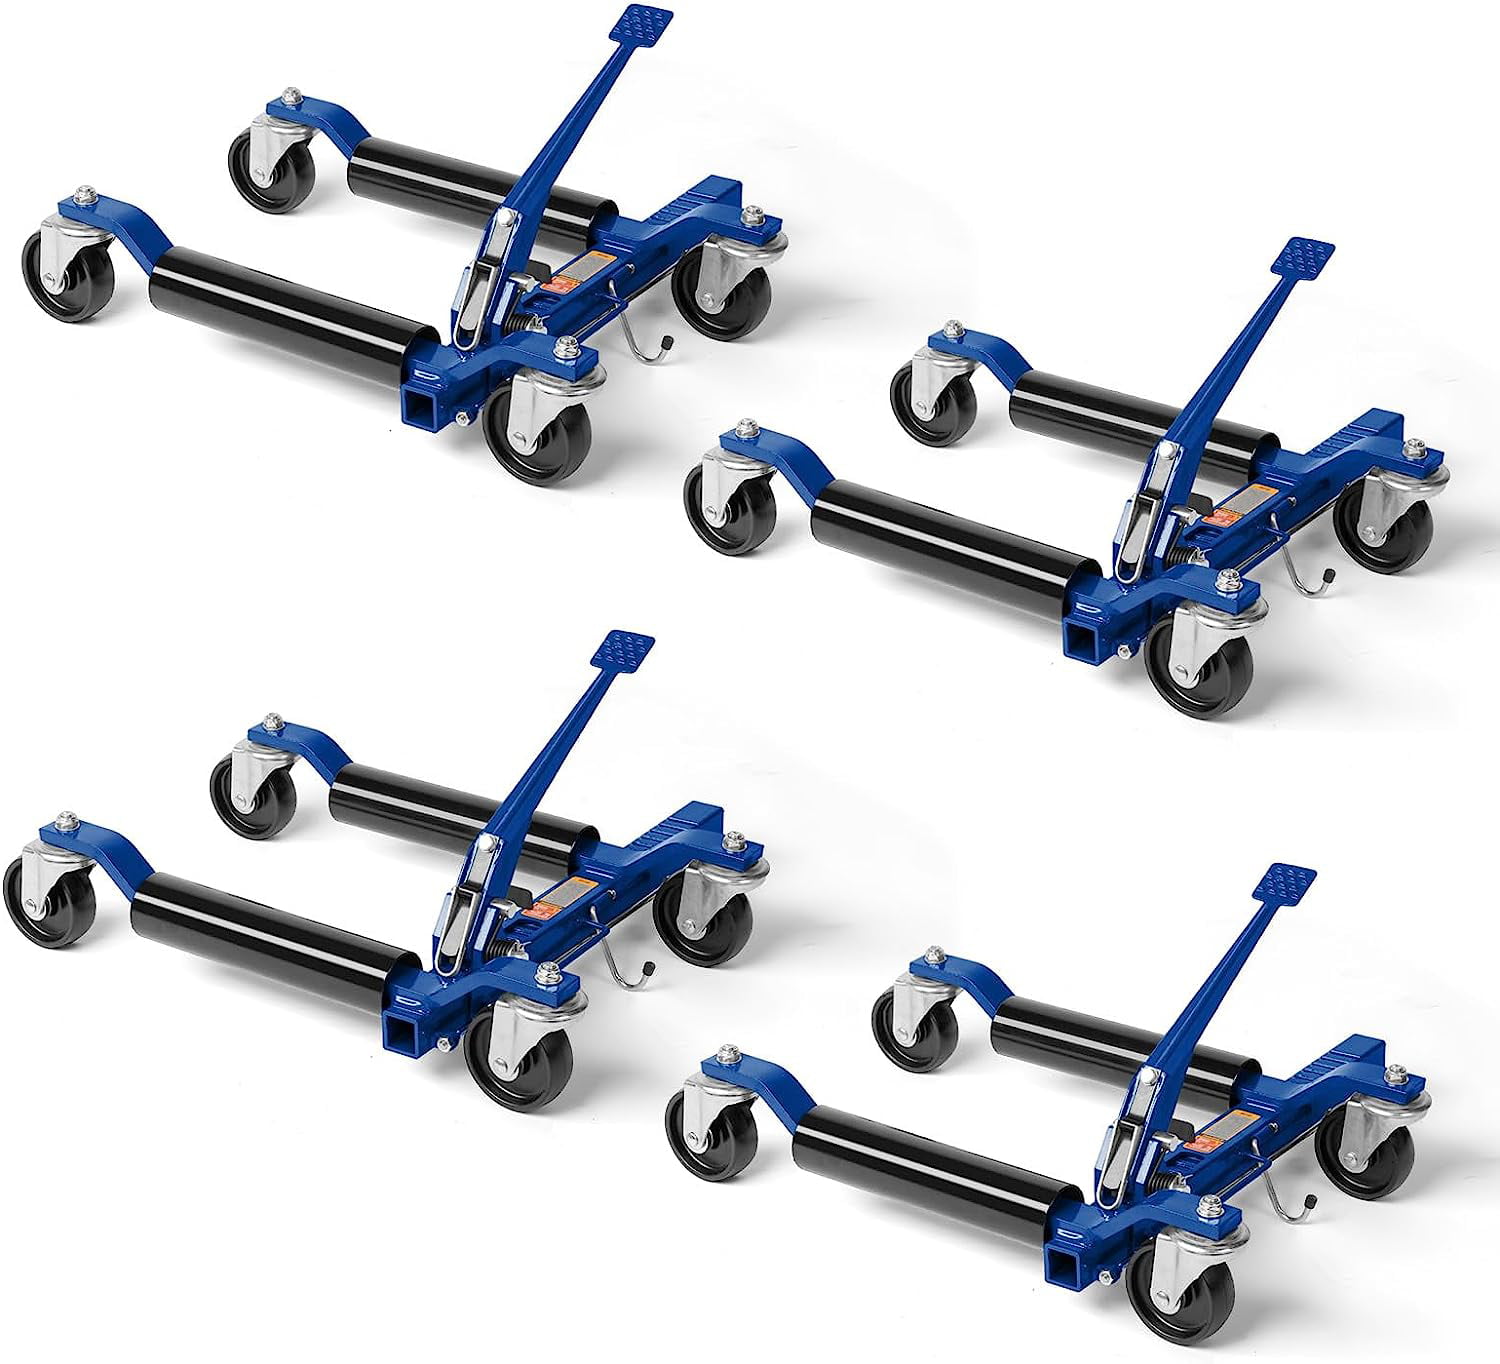 FROST 12 Hydraulic Vehicle Positioning Jack Dollies (Set of 2)